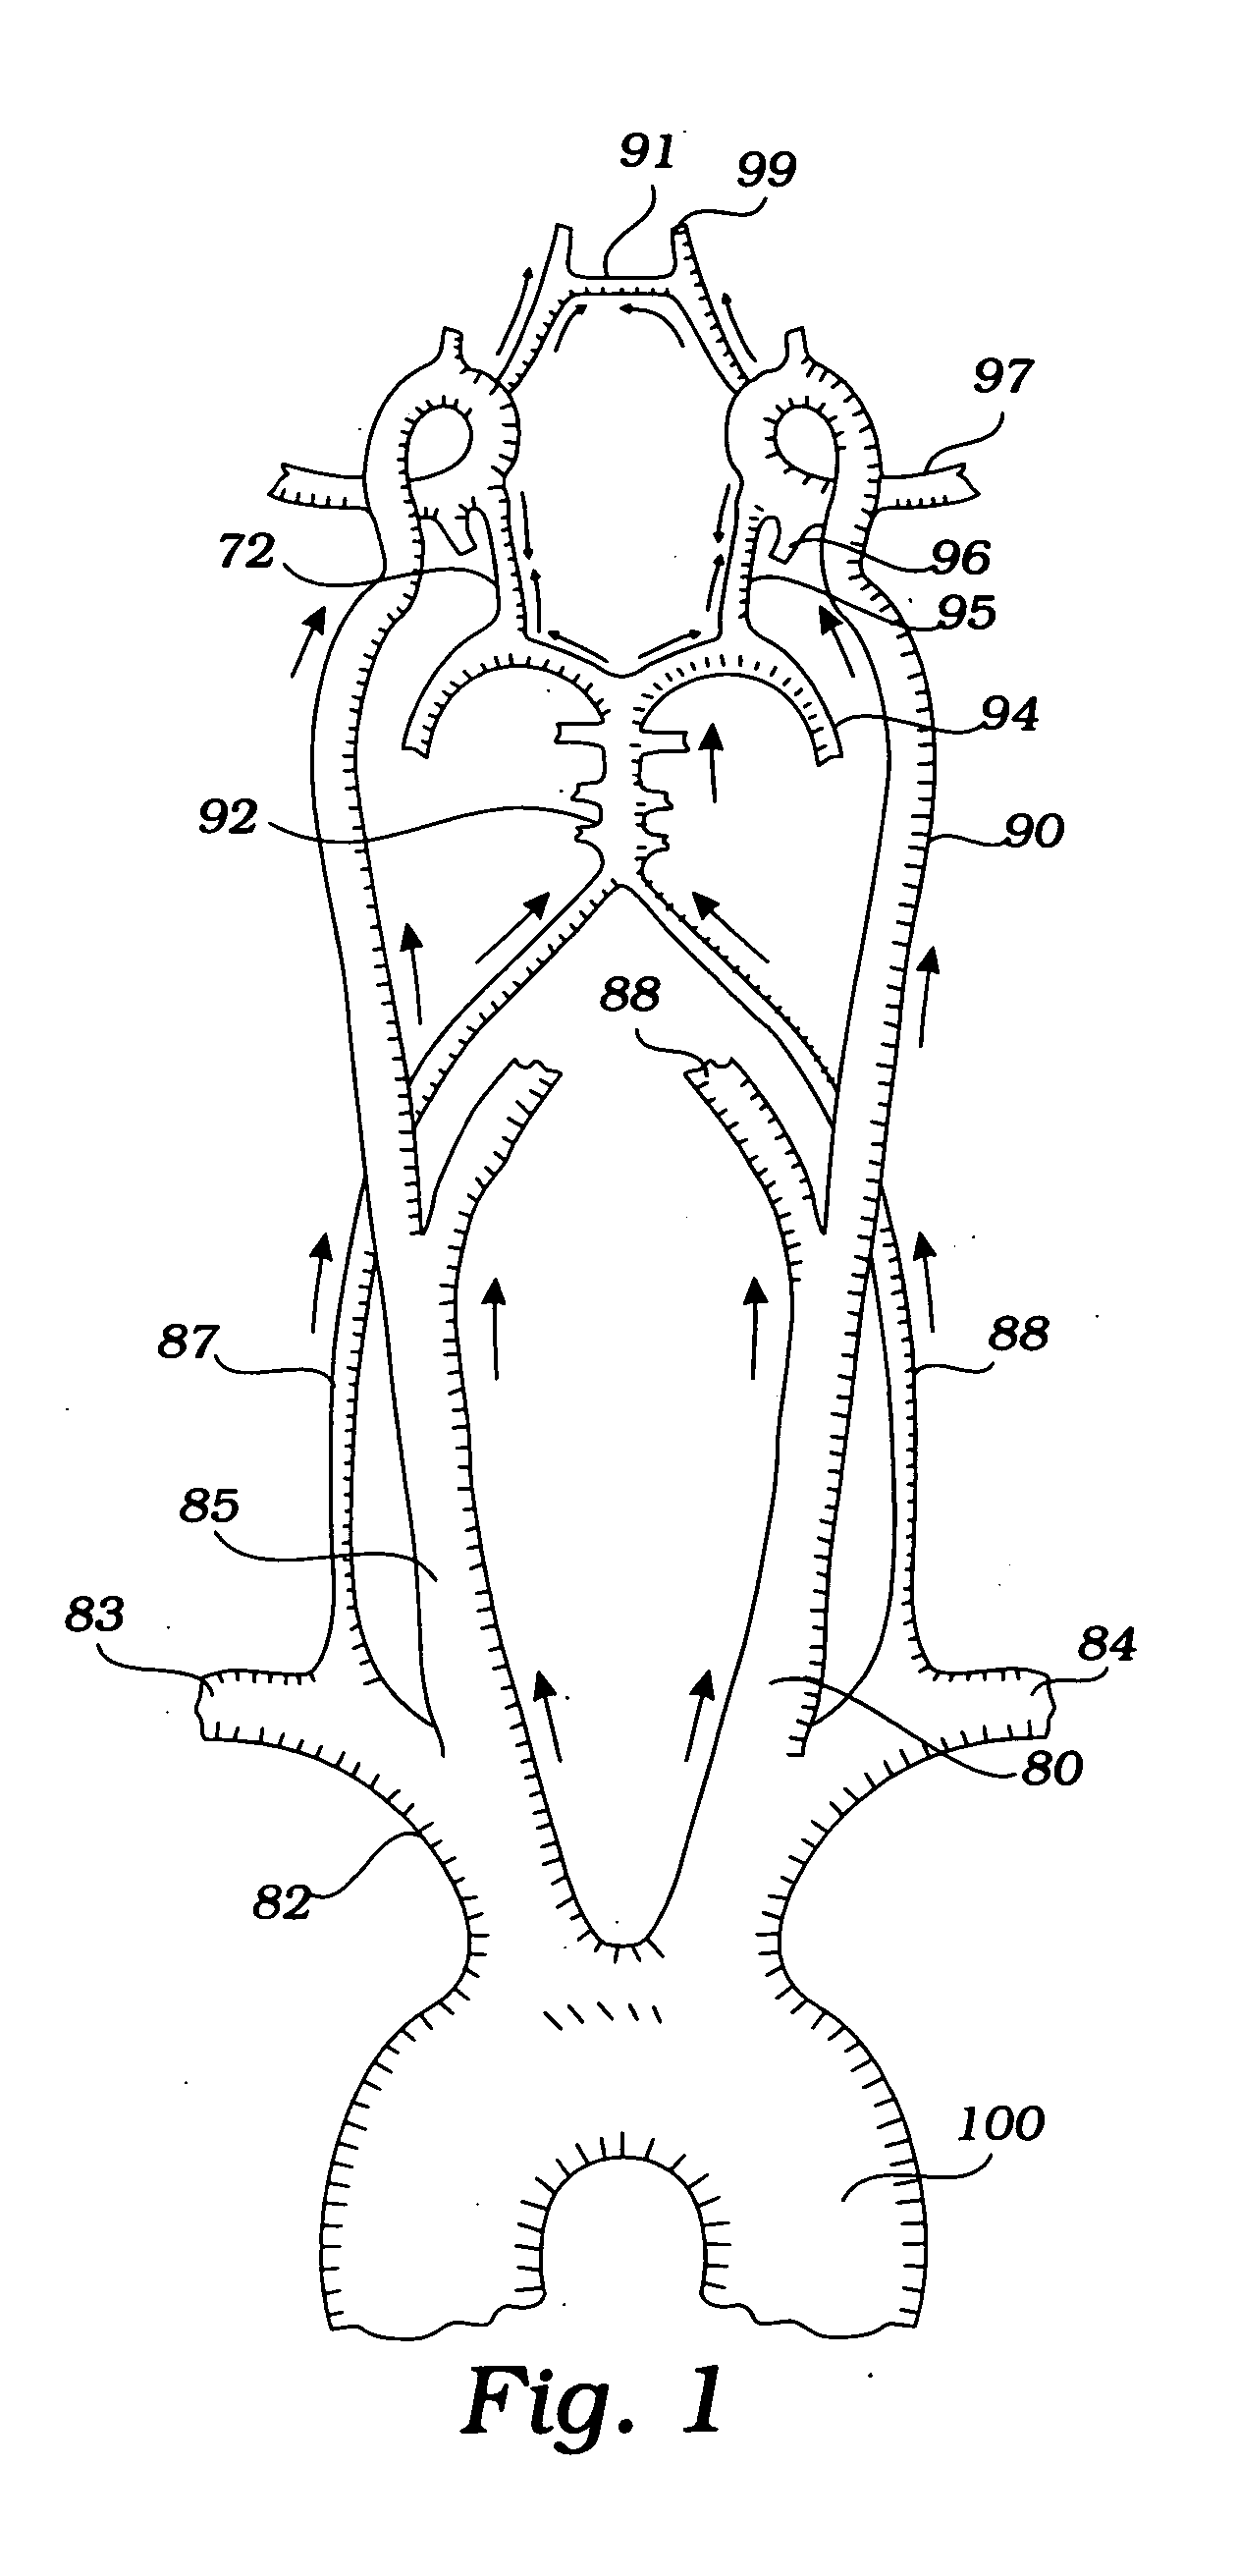 Devices and methods for preventing distal embolization using flow reversal and perfusion augmentation within the cerebral vasculature